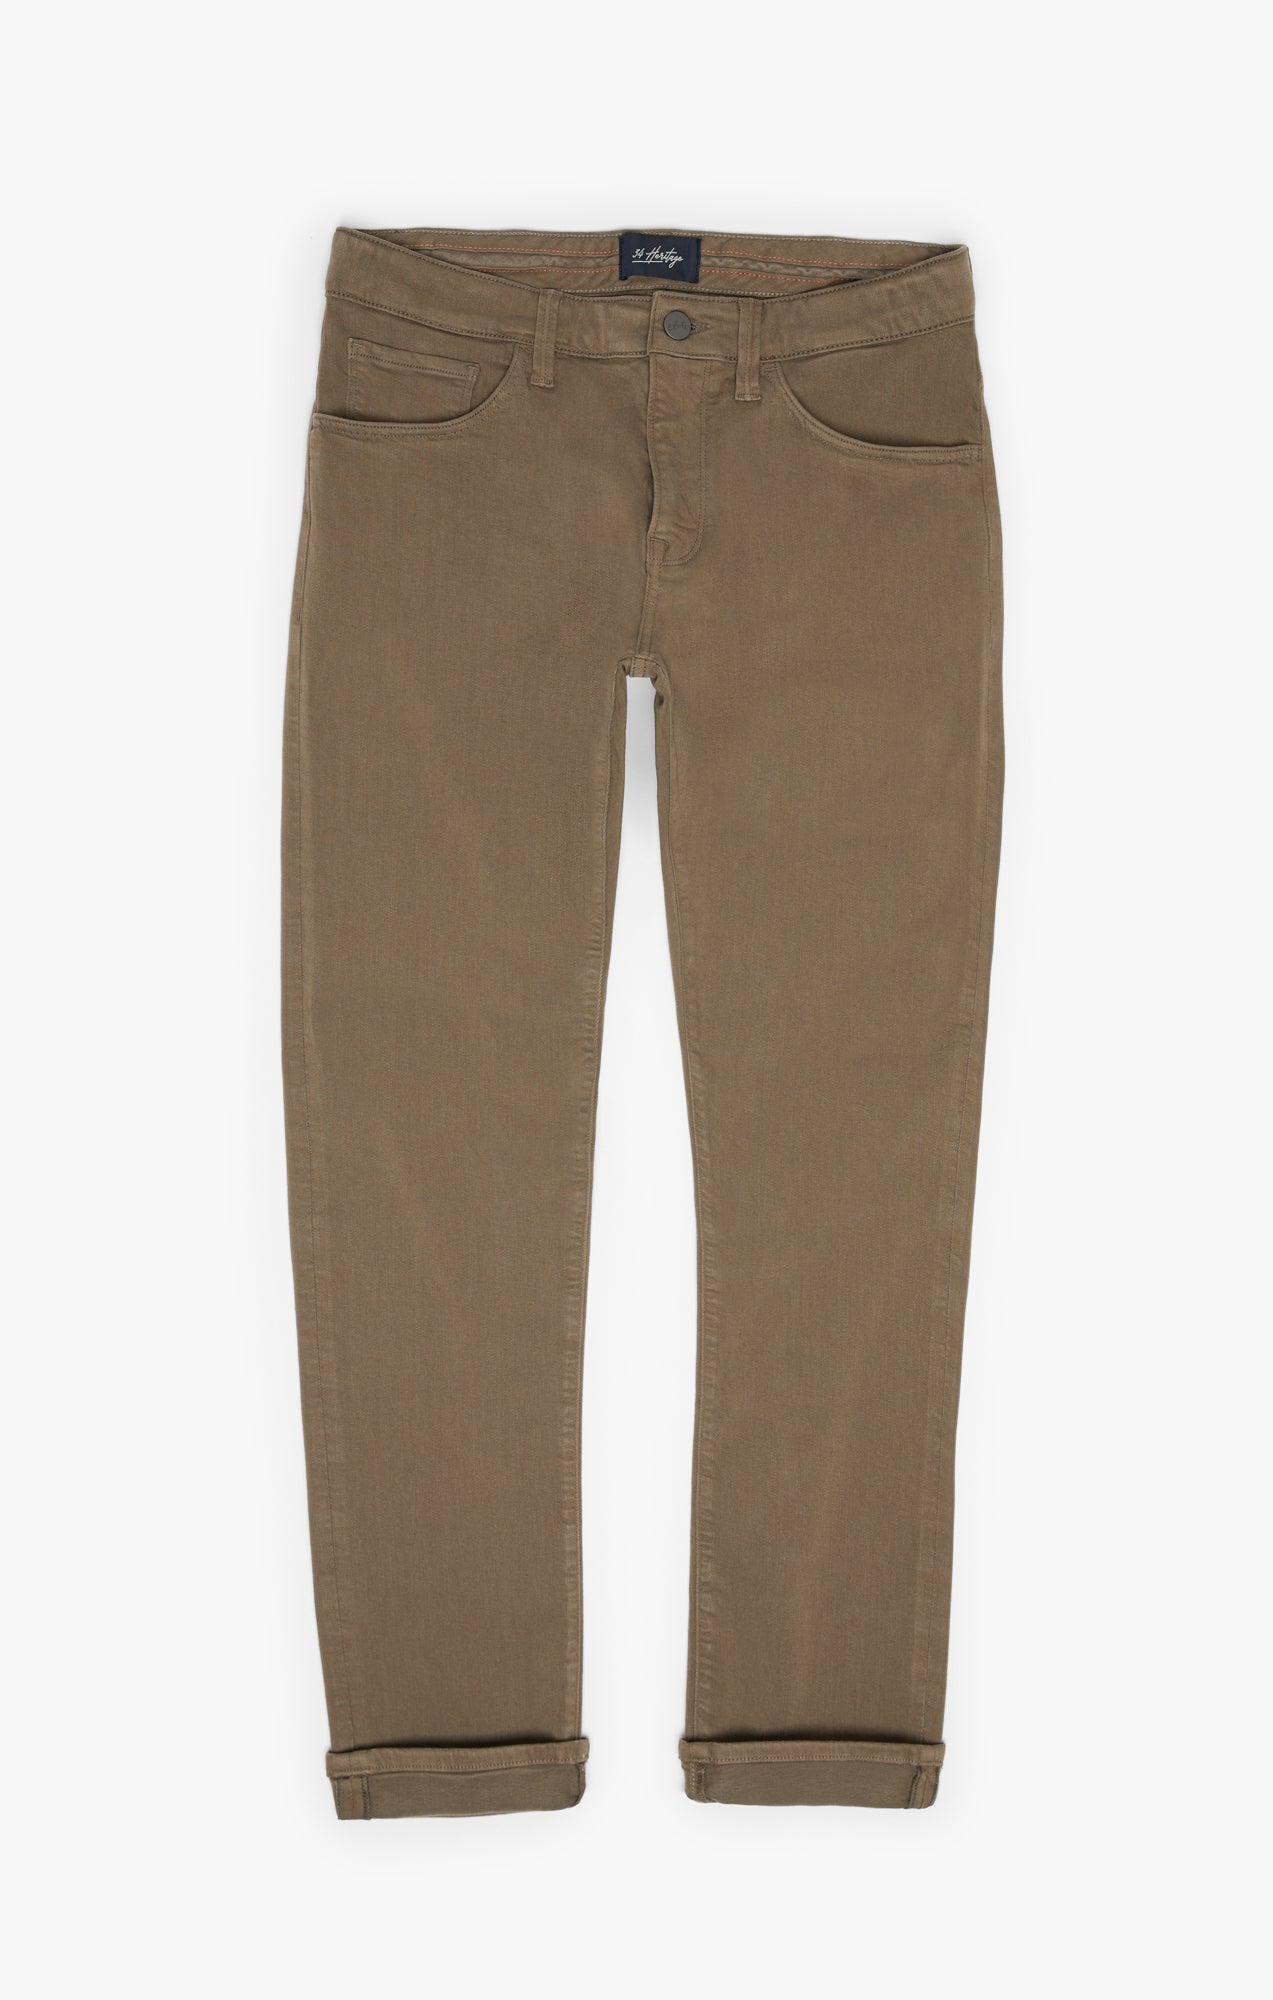 Charisma Relaxed Straight Leg Pants In Walnut Comfort